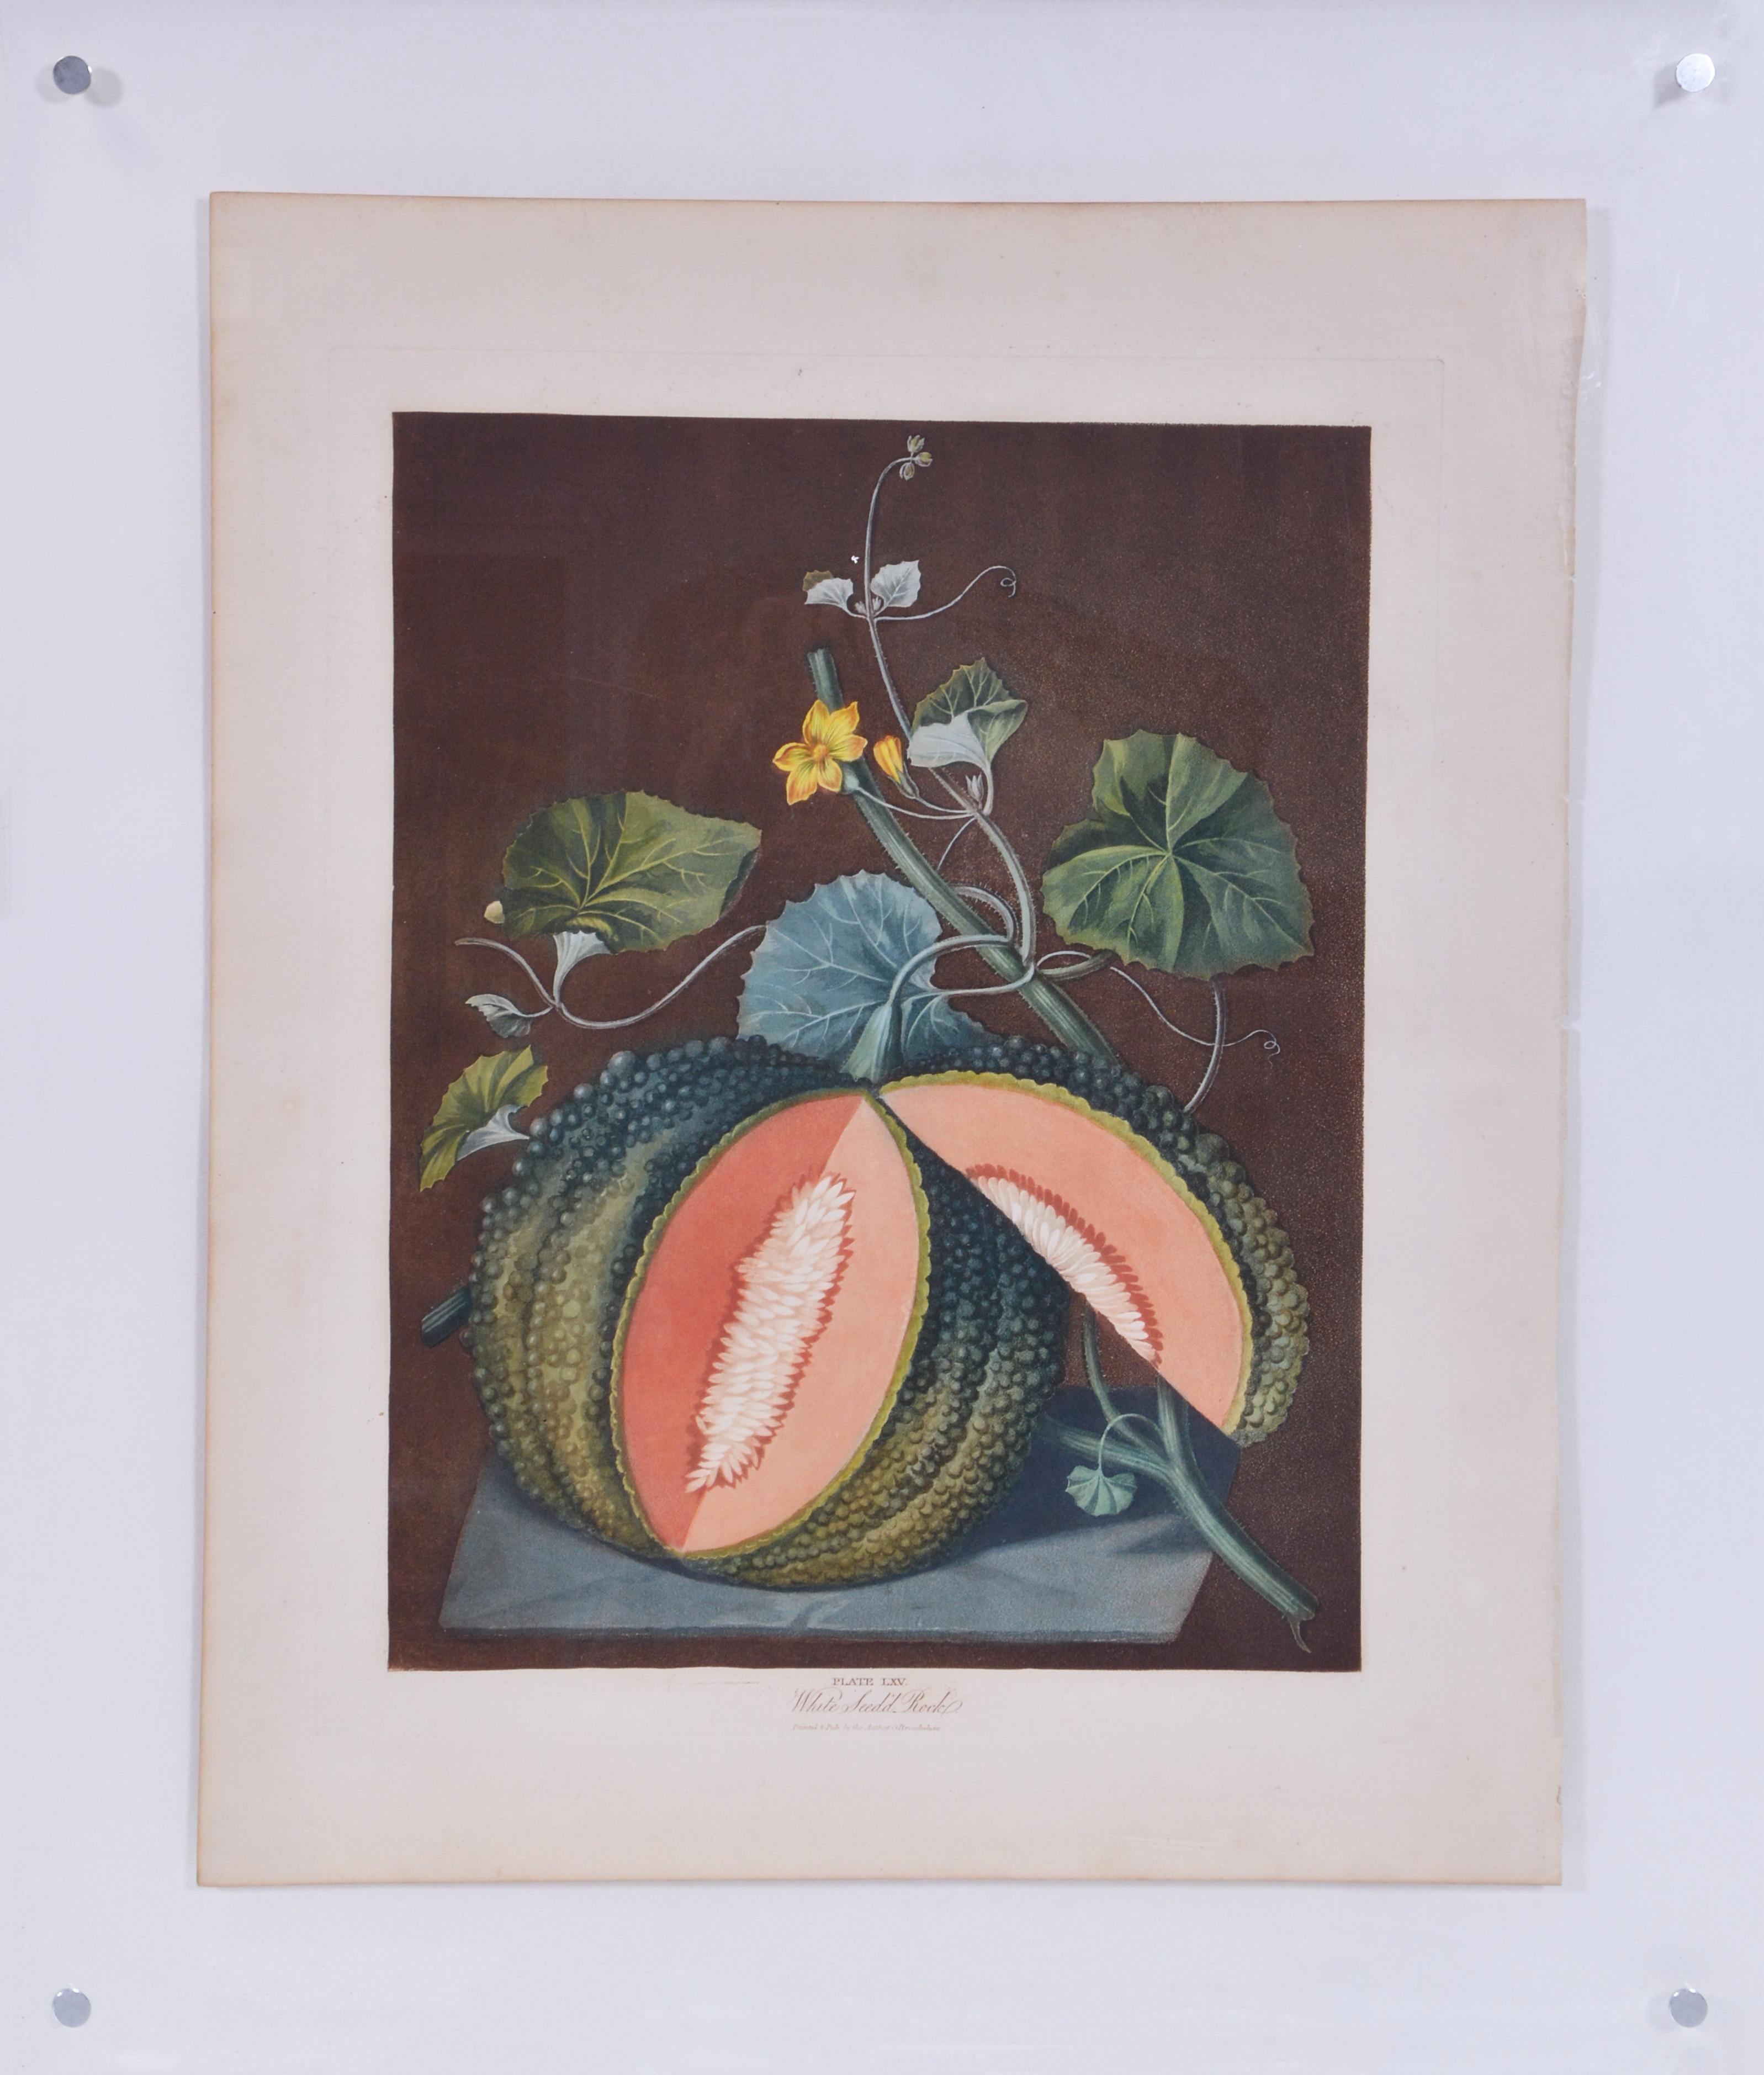 BROOKSHAW. A Pair of Melons: White Seed'd Rock and Silver Rock Mellon